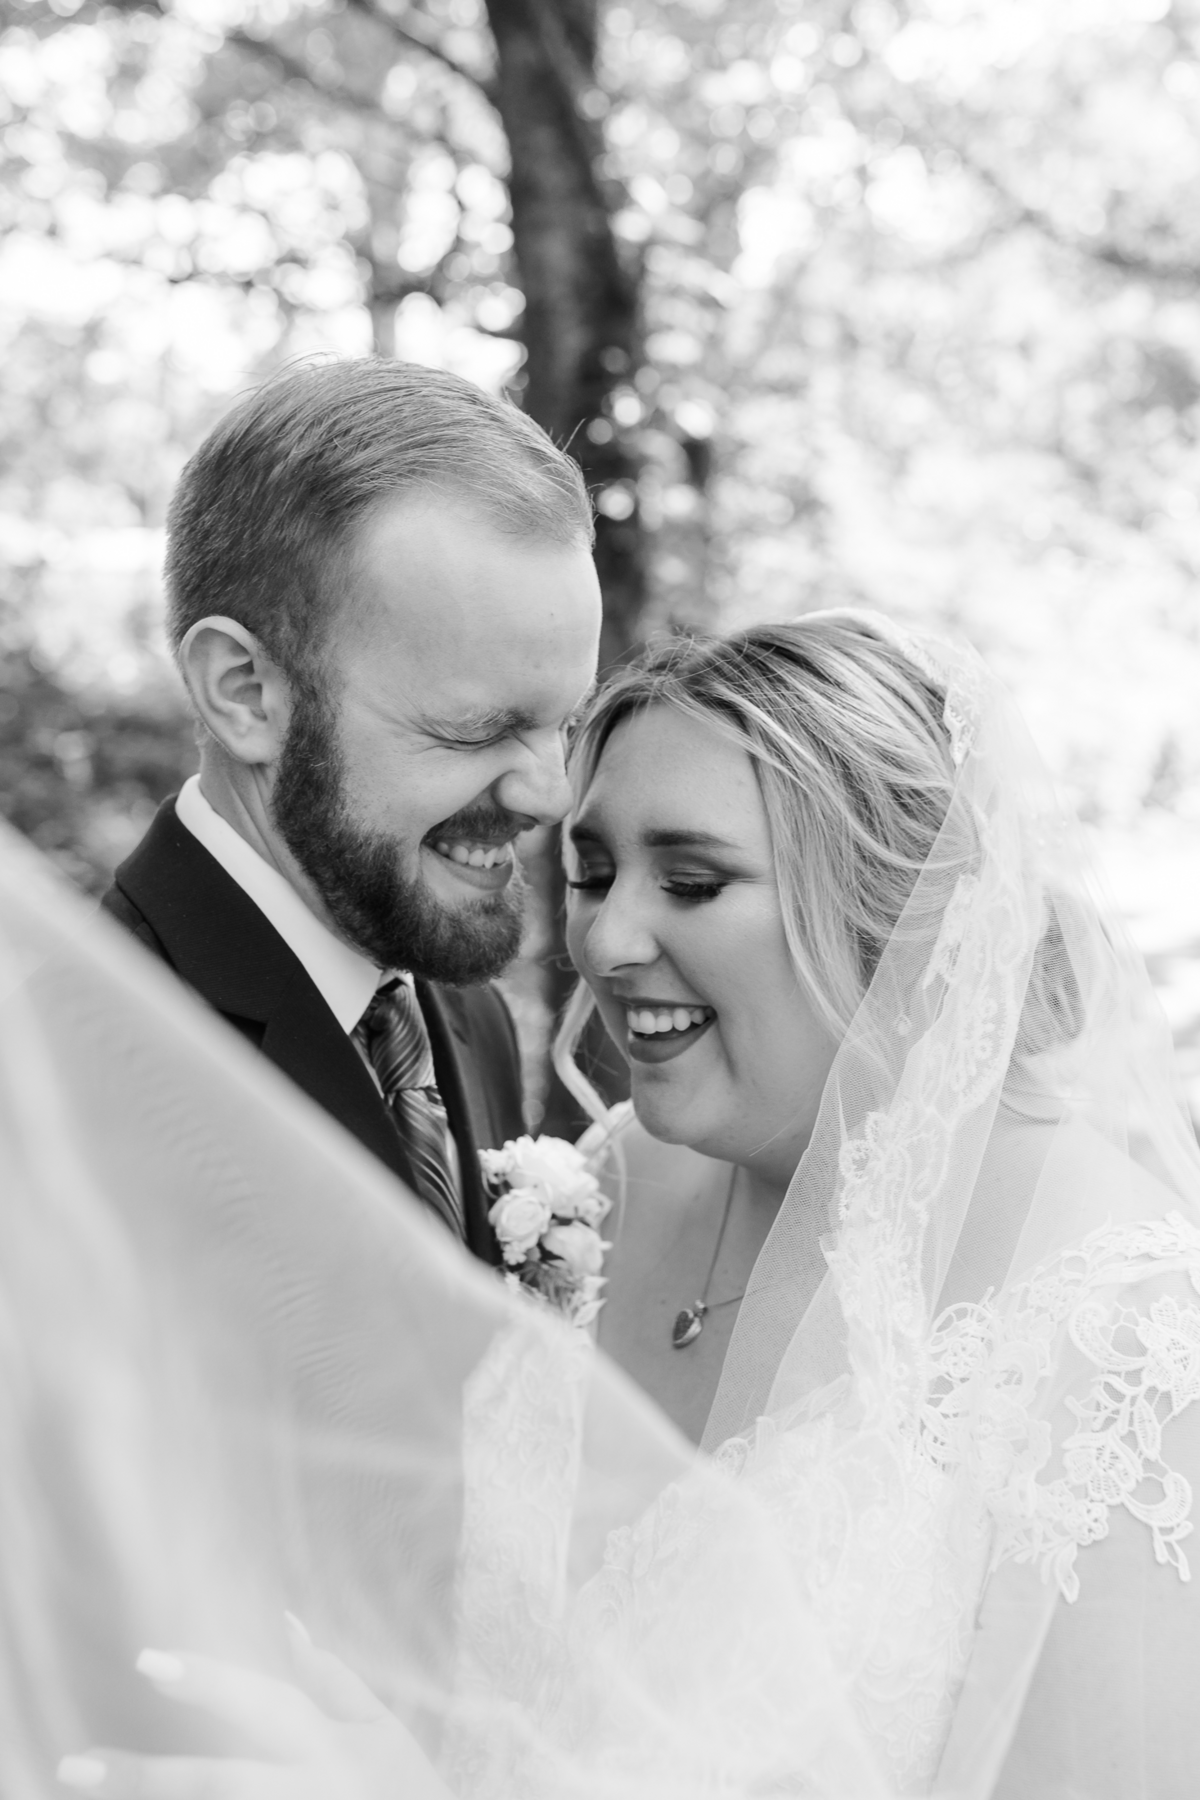 Intimate Backyard Wedding | Knoxville, TN  | Carly Crawford Photography | Knoxville Wedding, Couples, and Portrait Photographer-324547